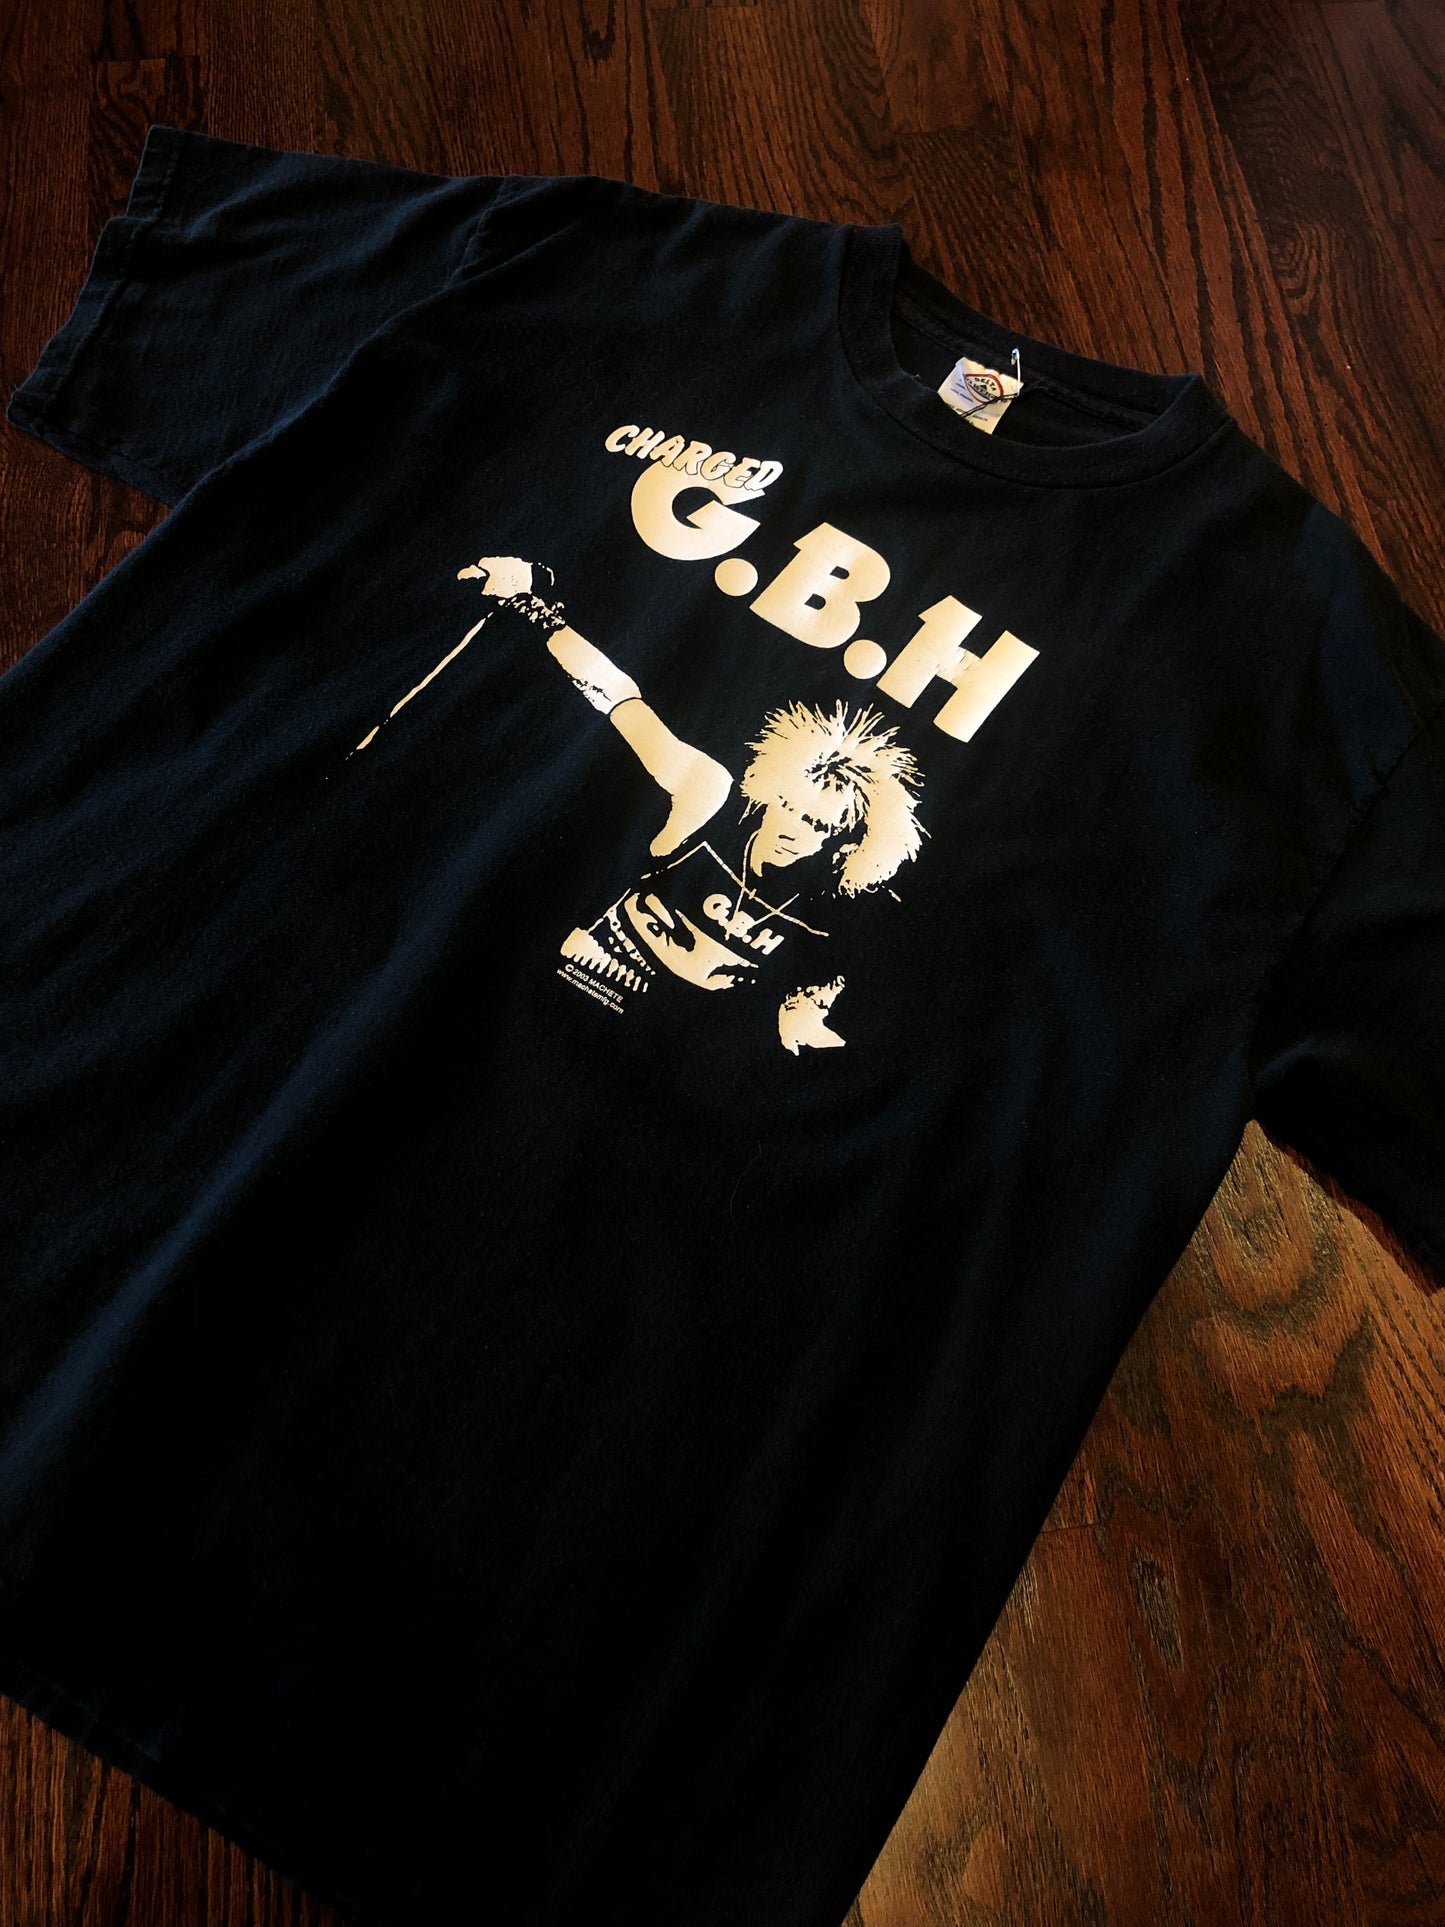 Vintage “Charged” GBH T-Shirt